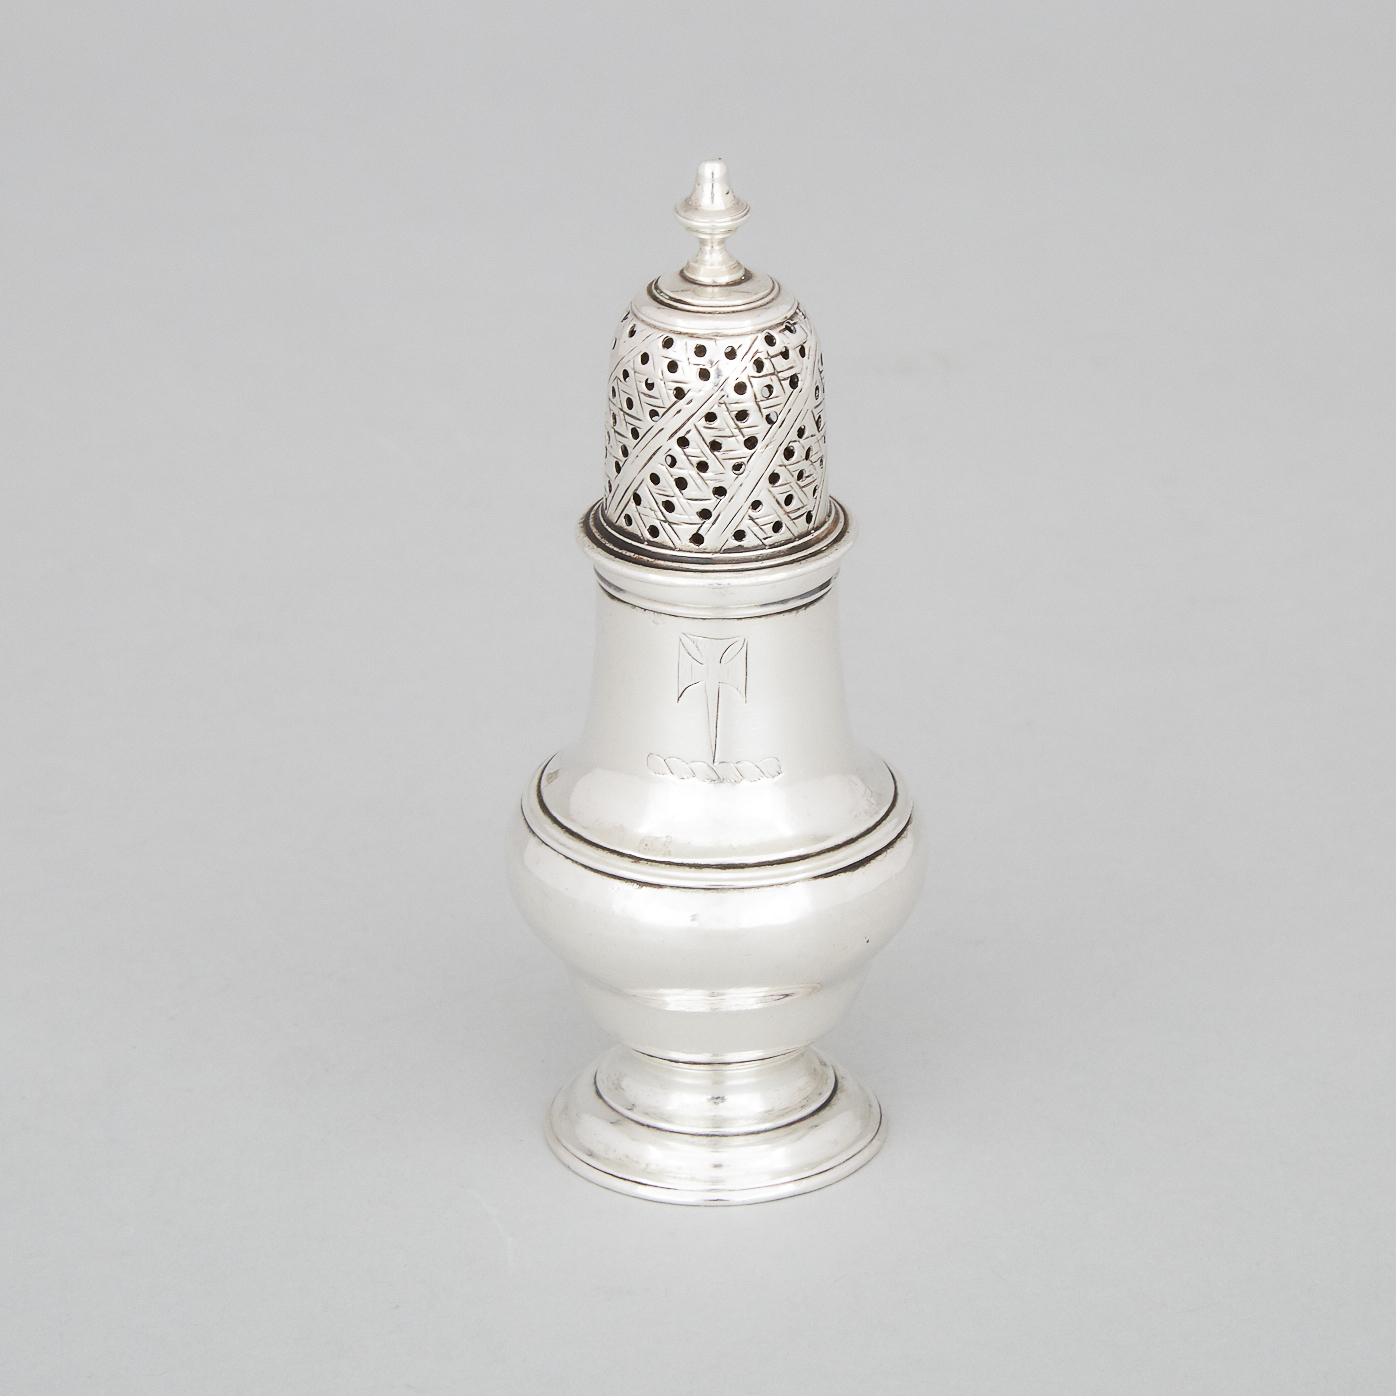 George III Silver Baluster Caster, London, 1765